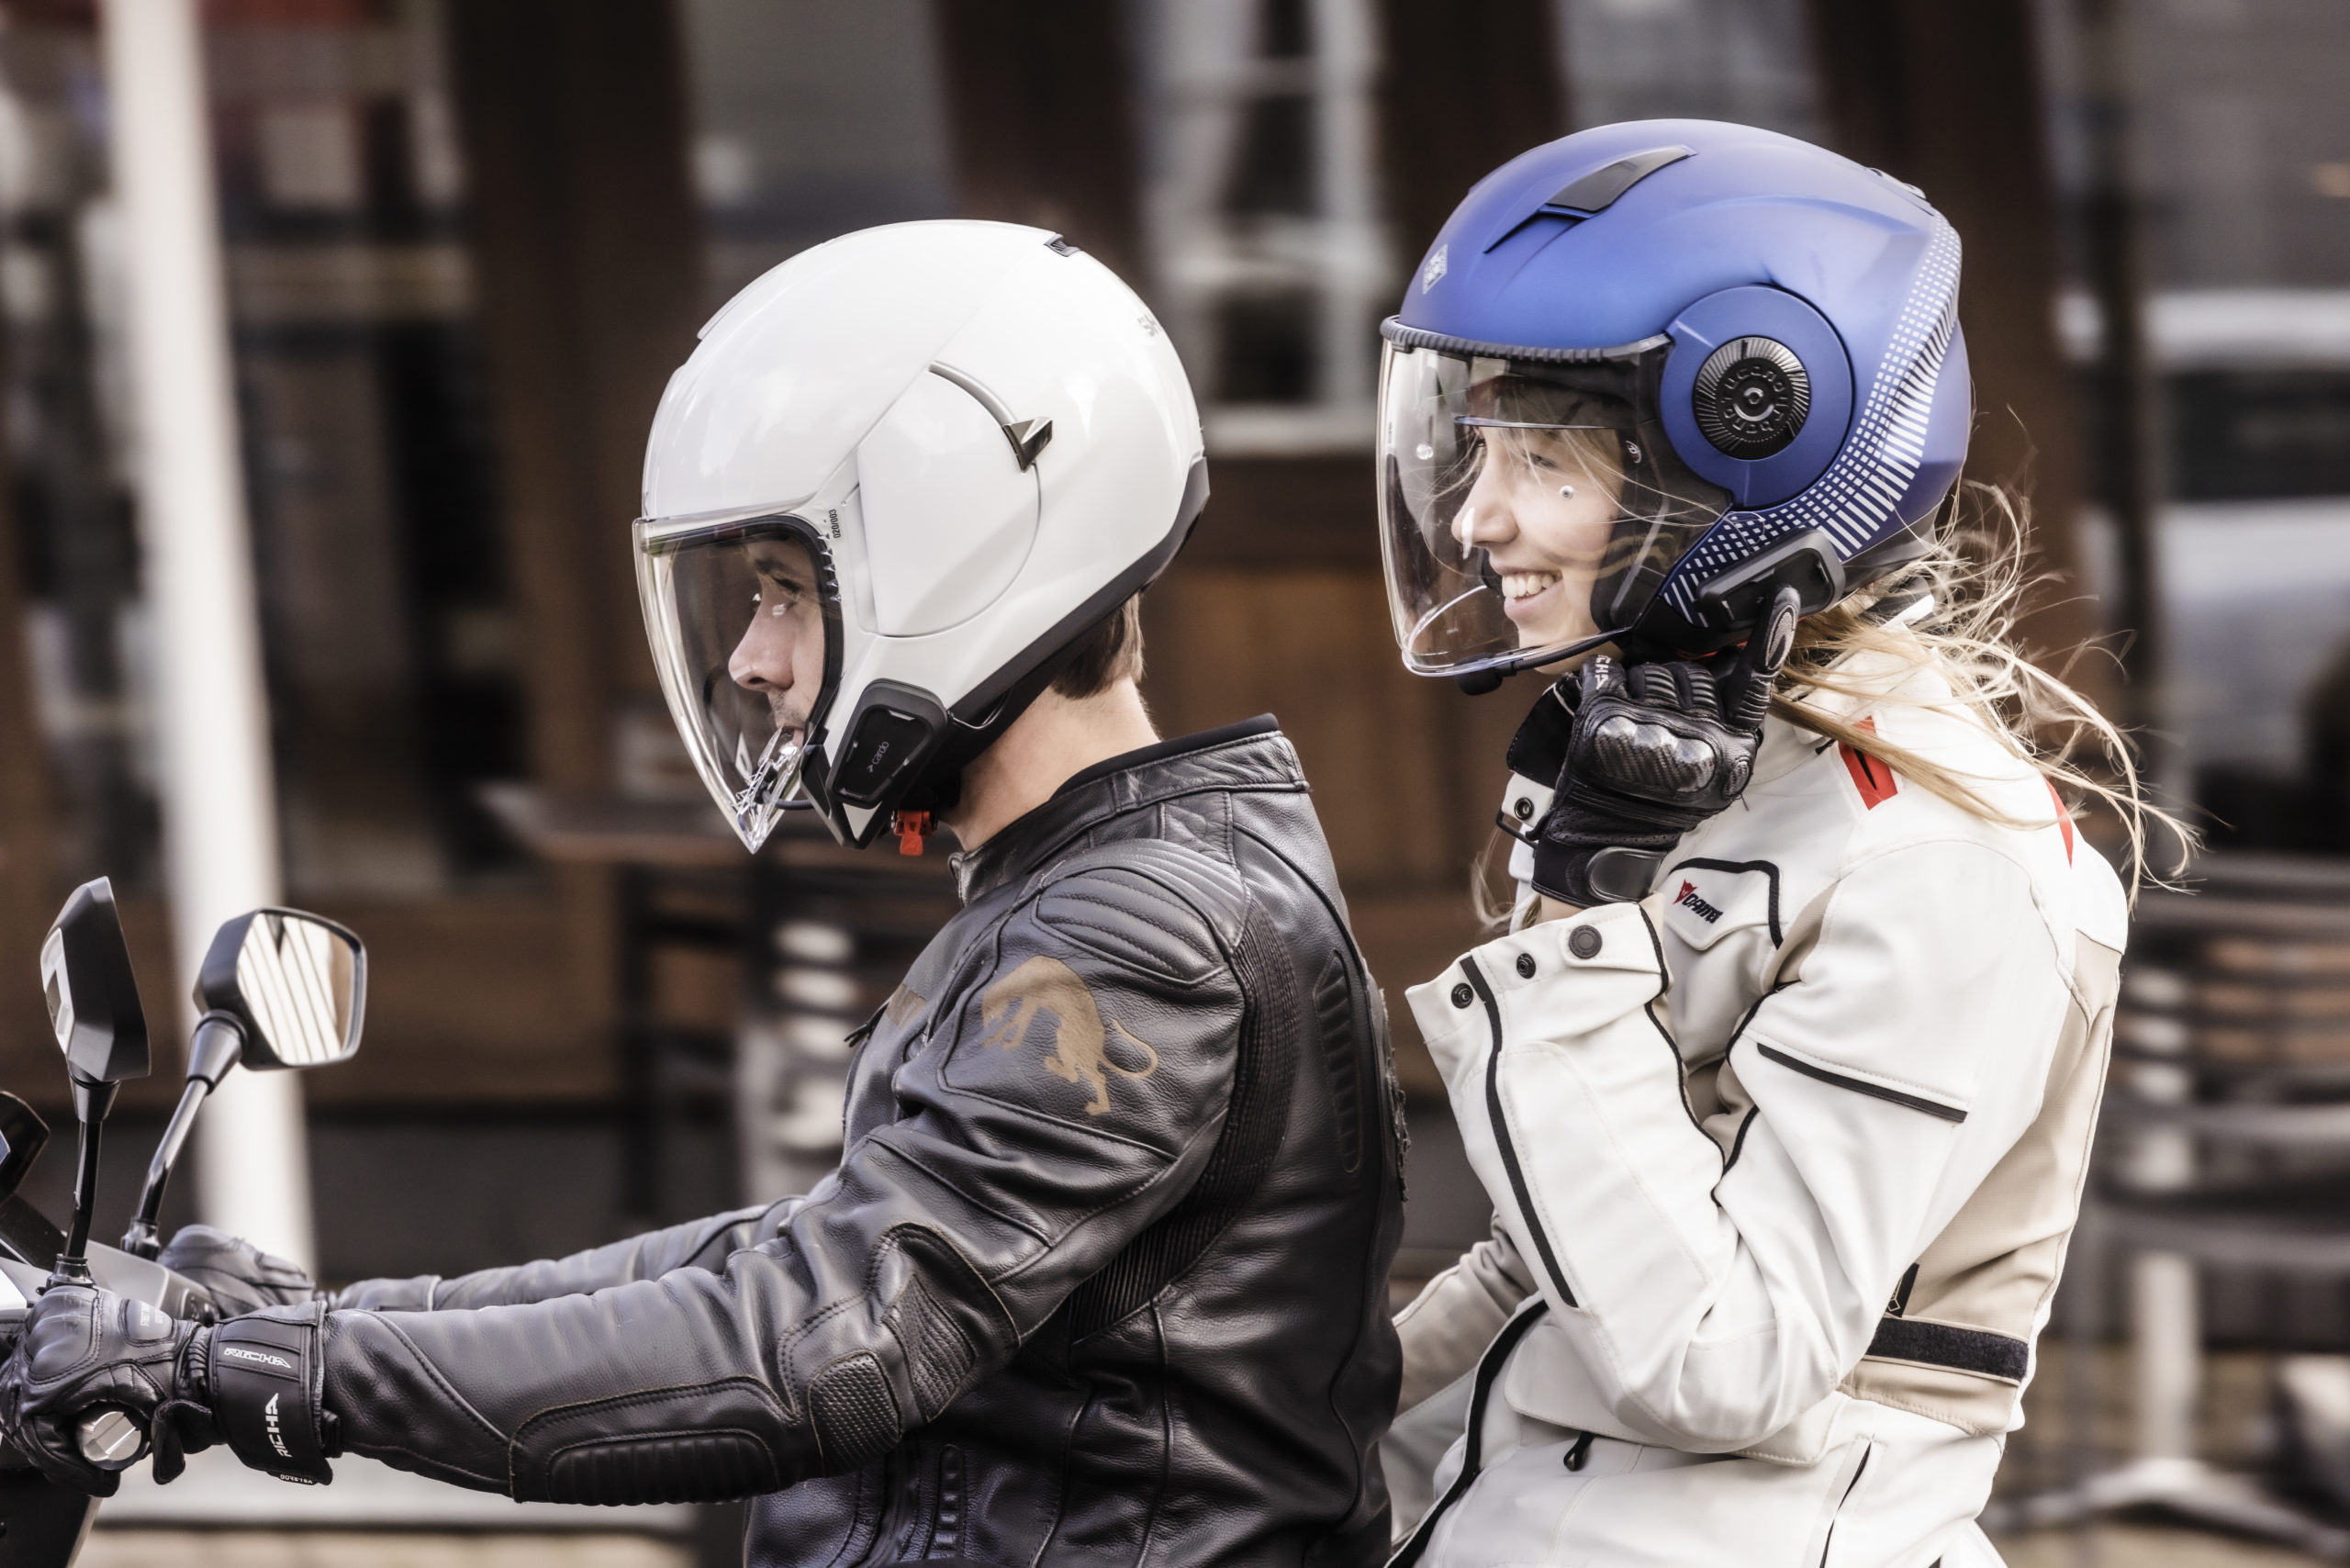 A view of two riders using the new Cardo Systems Bluetooth Communicators